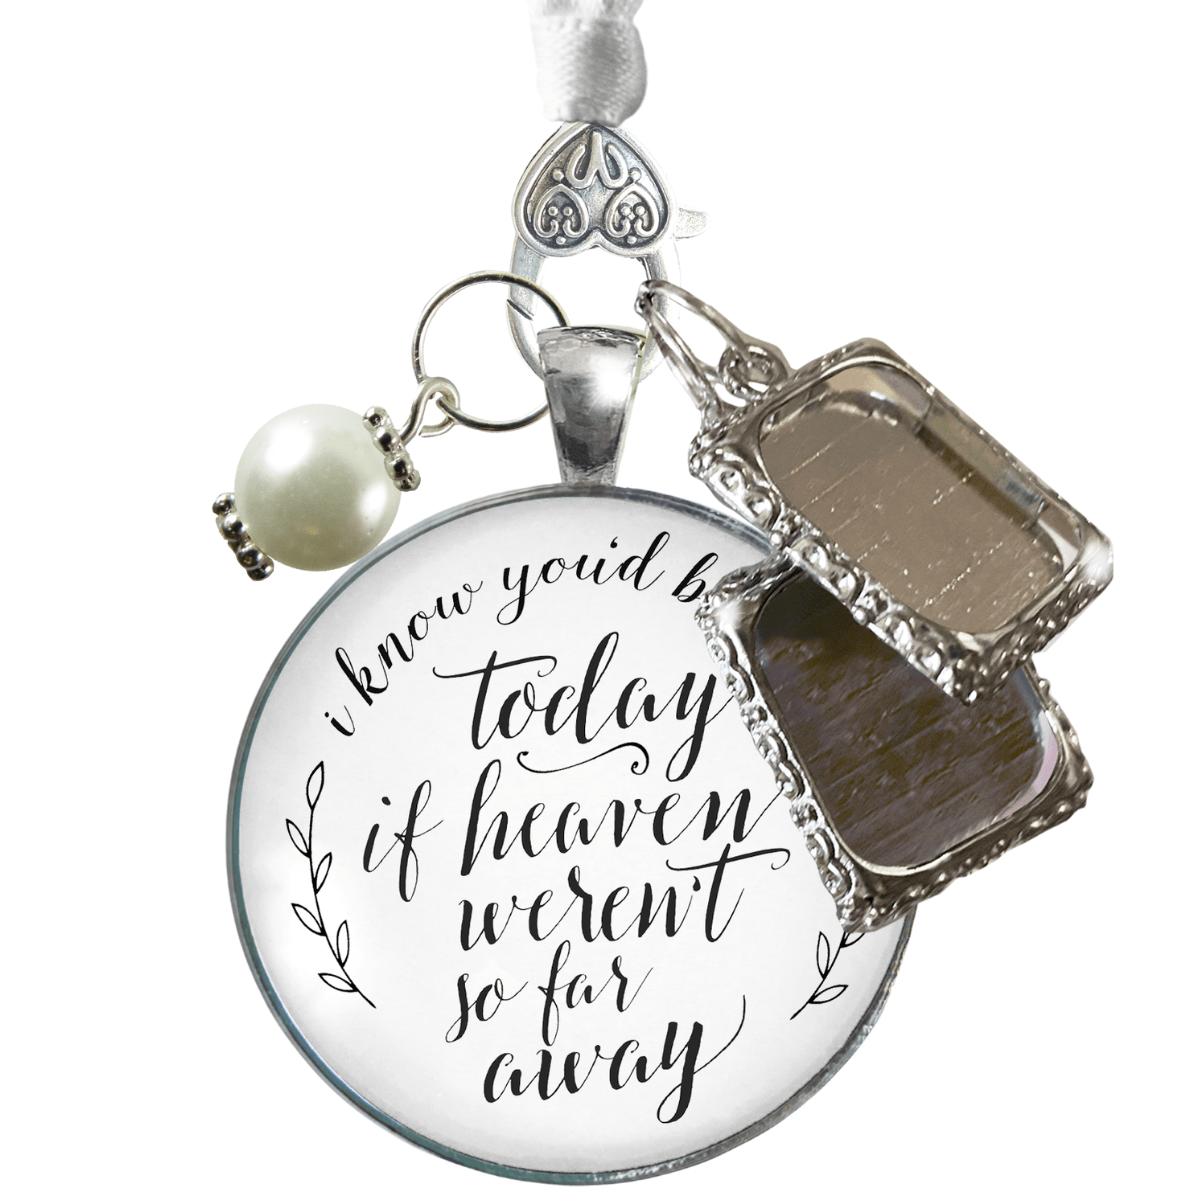 Wedding Bouquet Memorial Charm I Know You'd Be Here Heaven Silvertone 2 Frames Jewels - Gutsy Goodness Handmade Jewelry Gifts